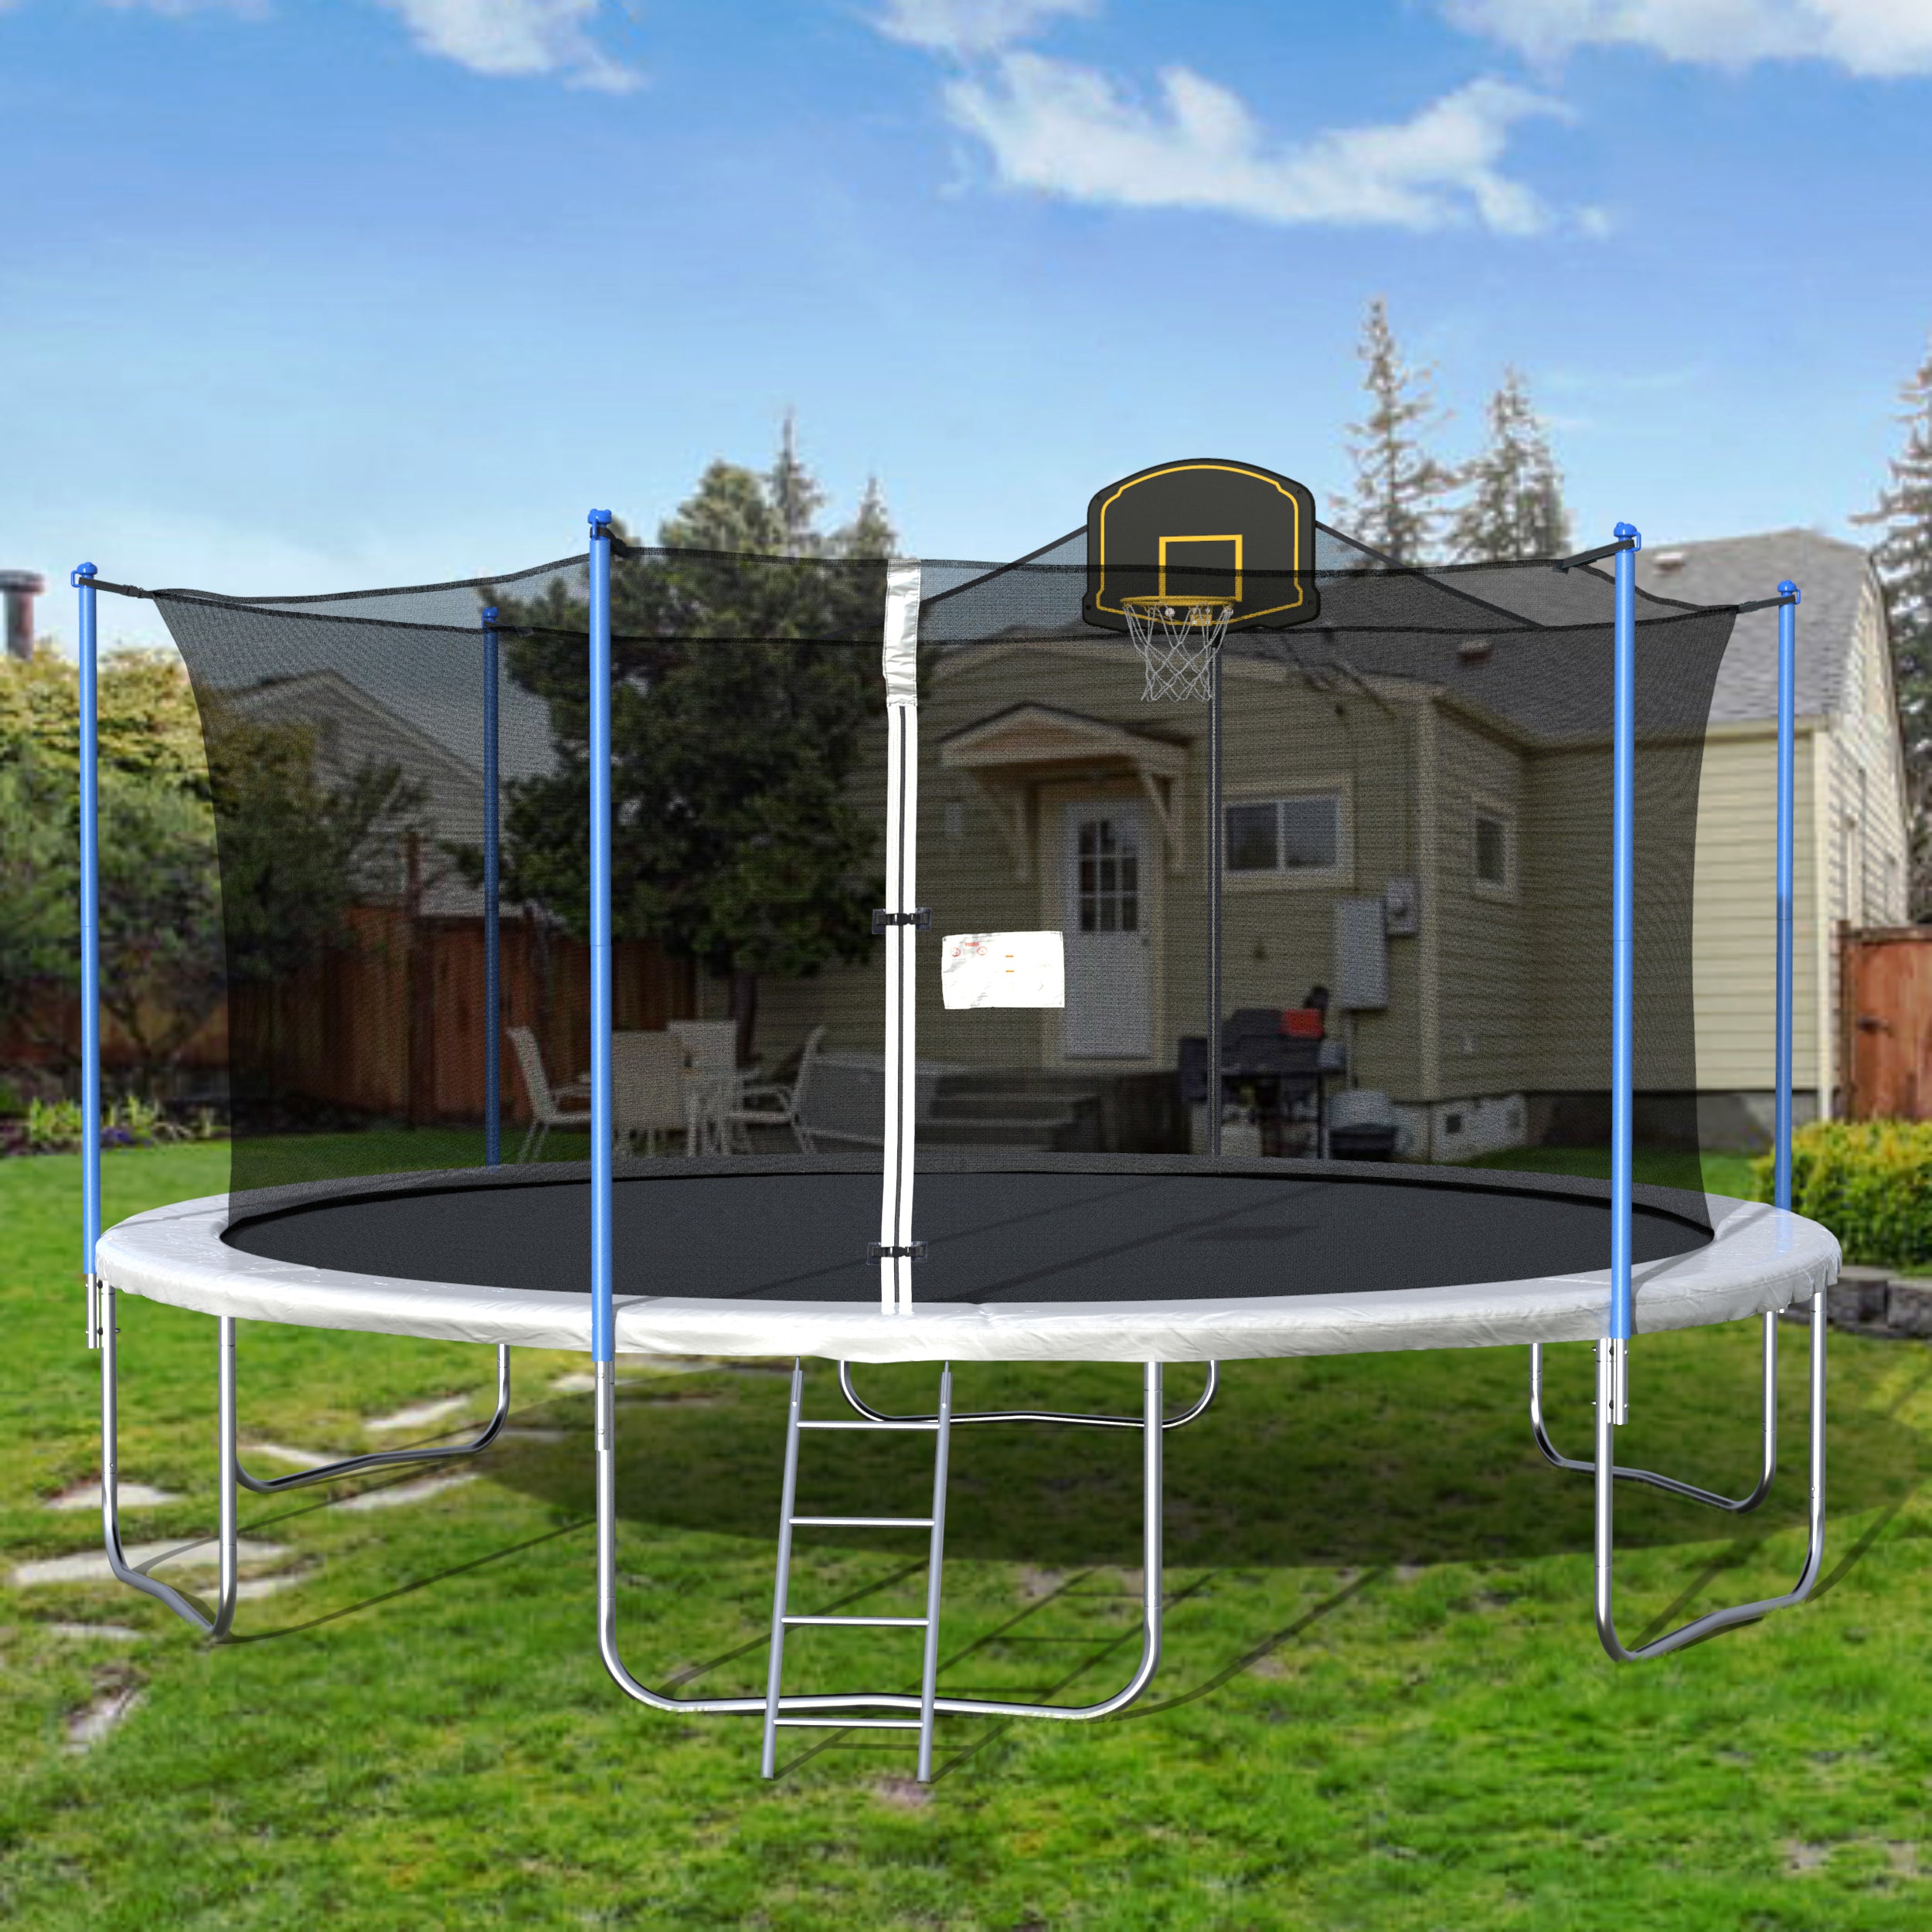 Pro Outdoor Trampoline with Basketball Hoop 16FT, Gray